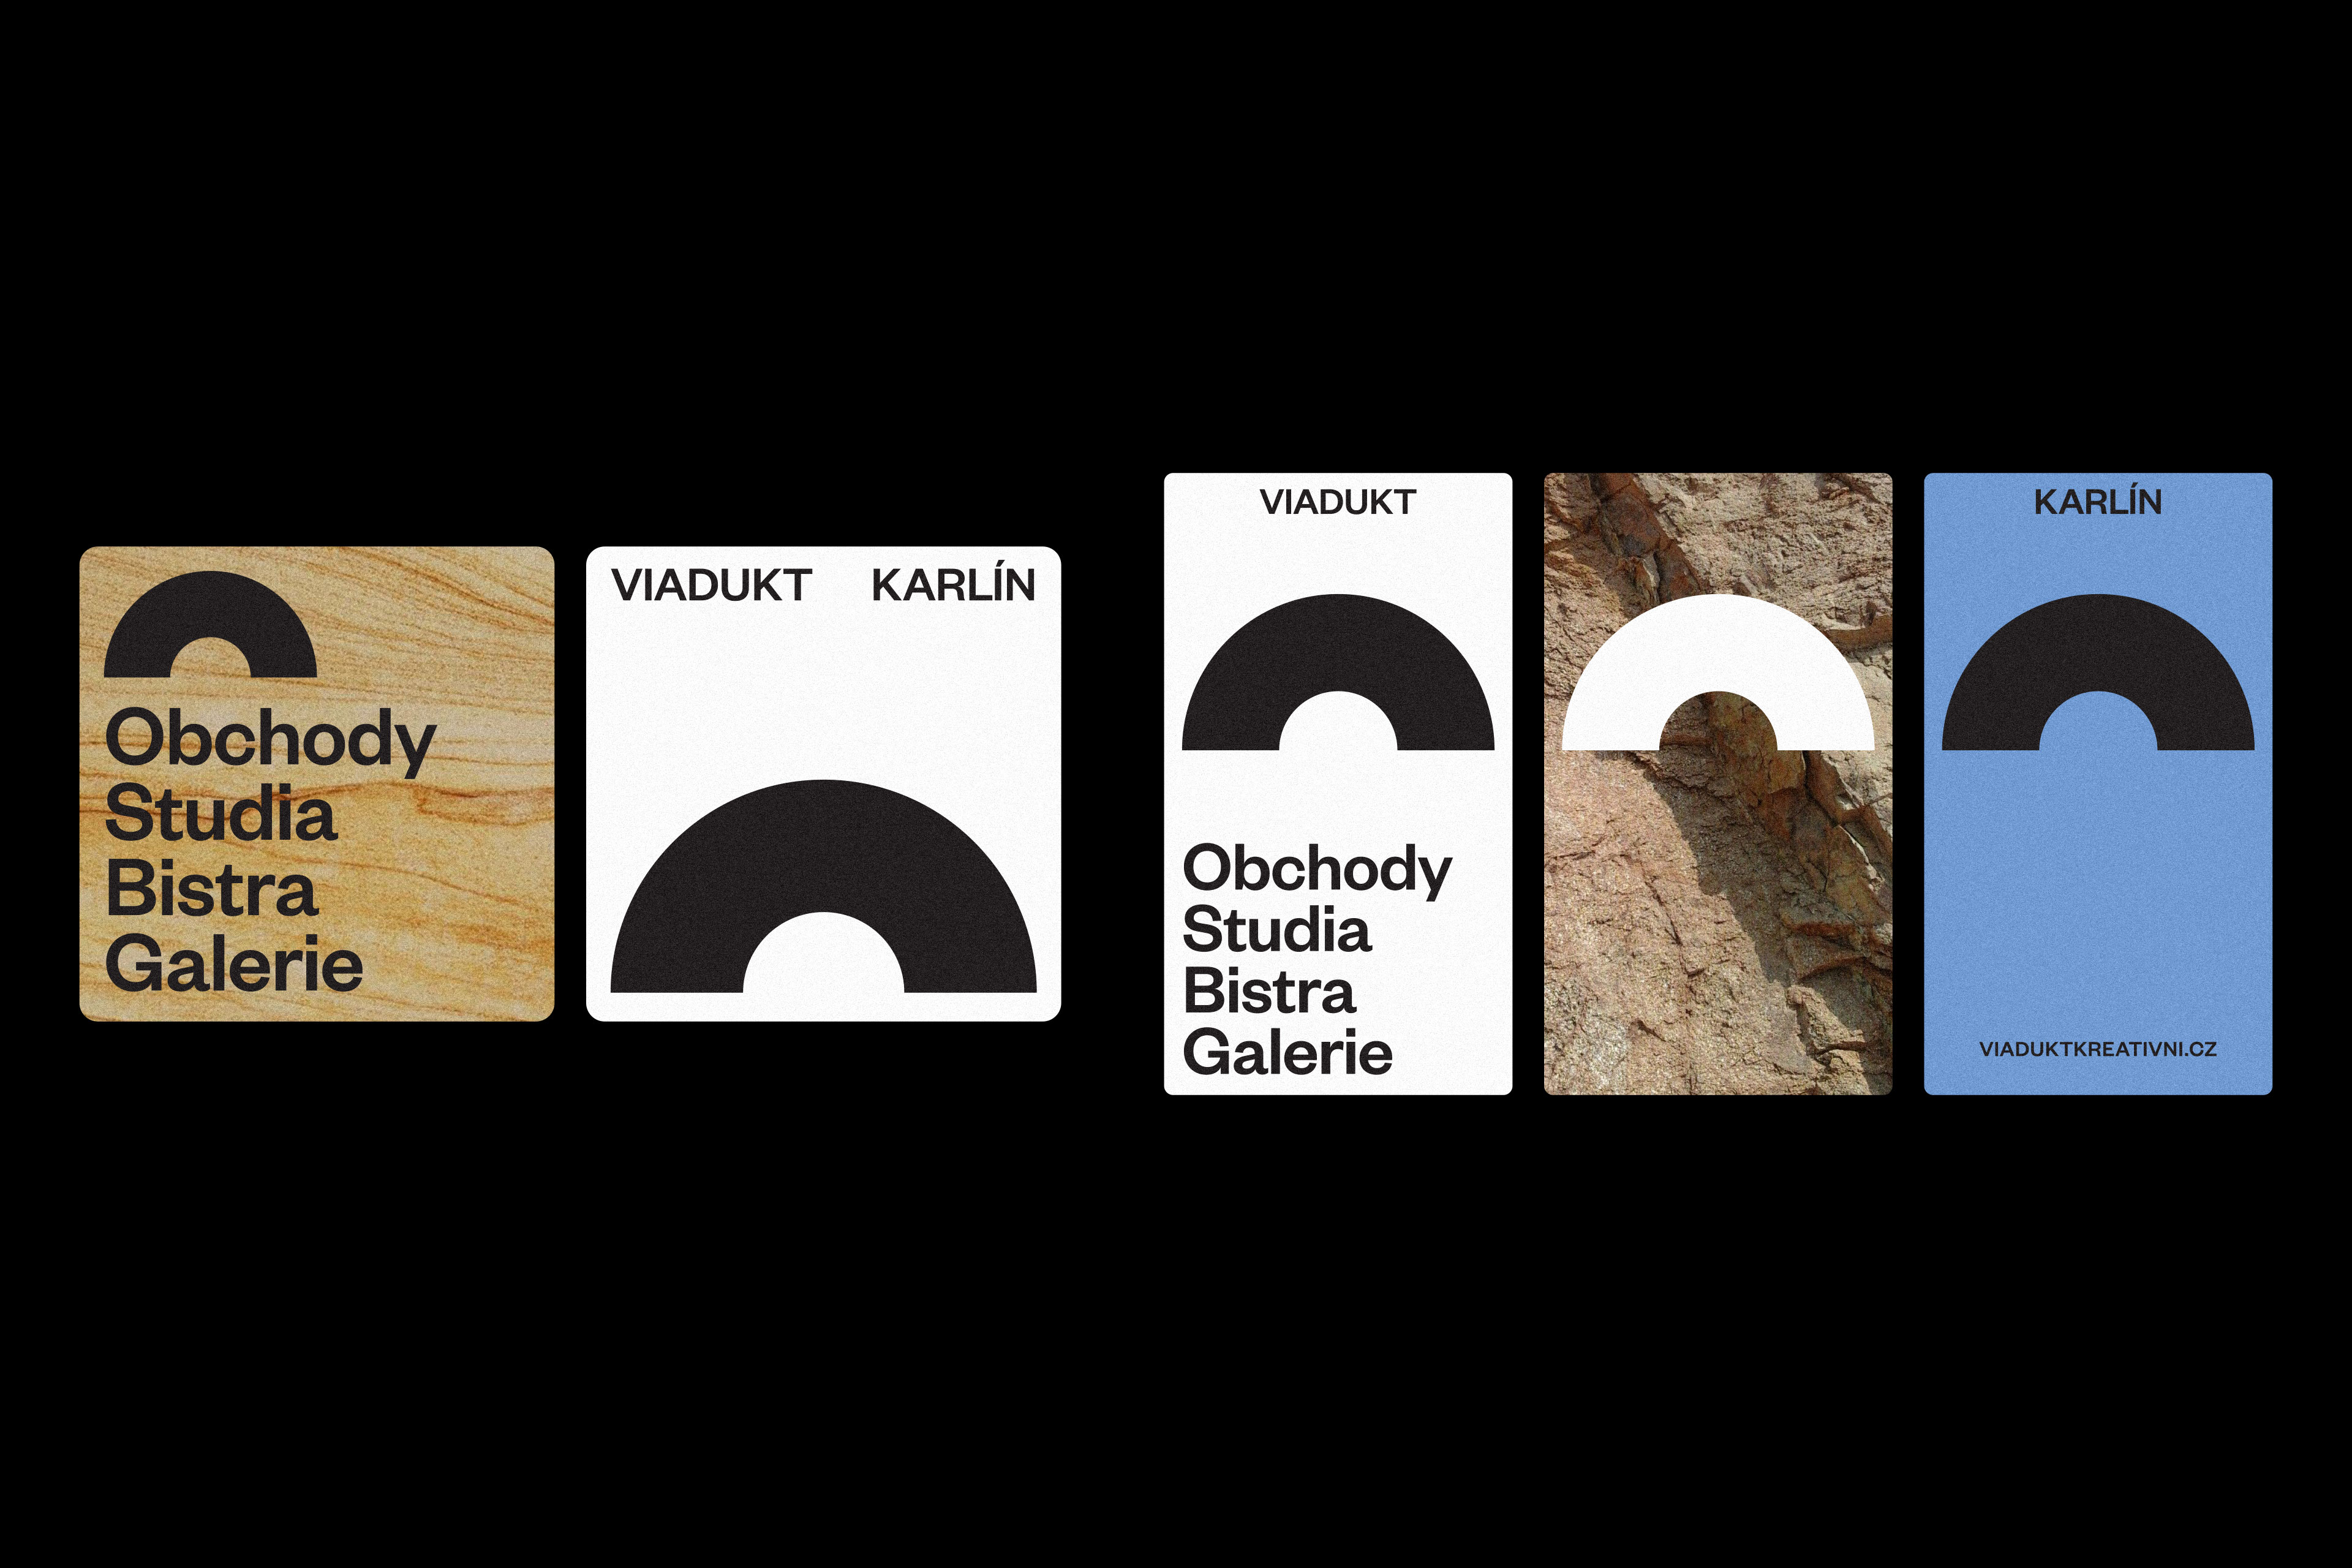 A series of four business cards with different logos.